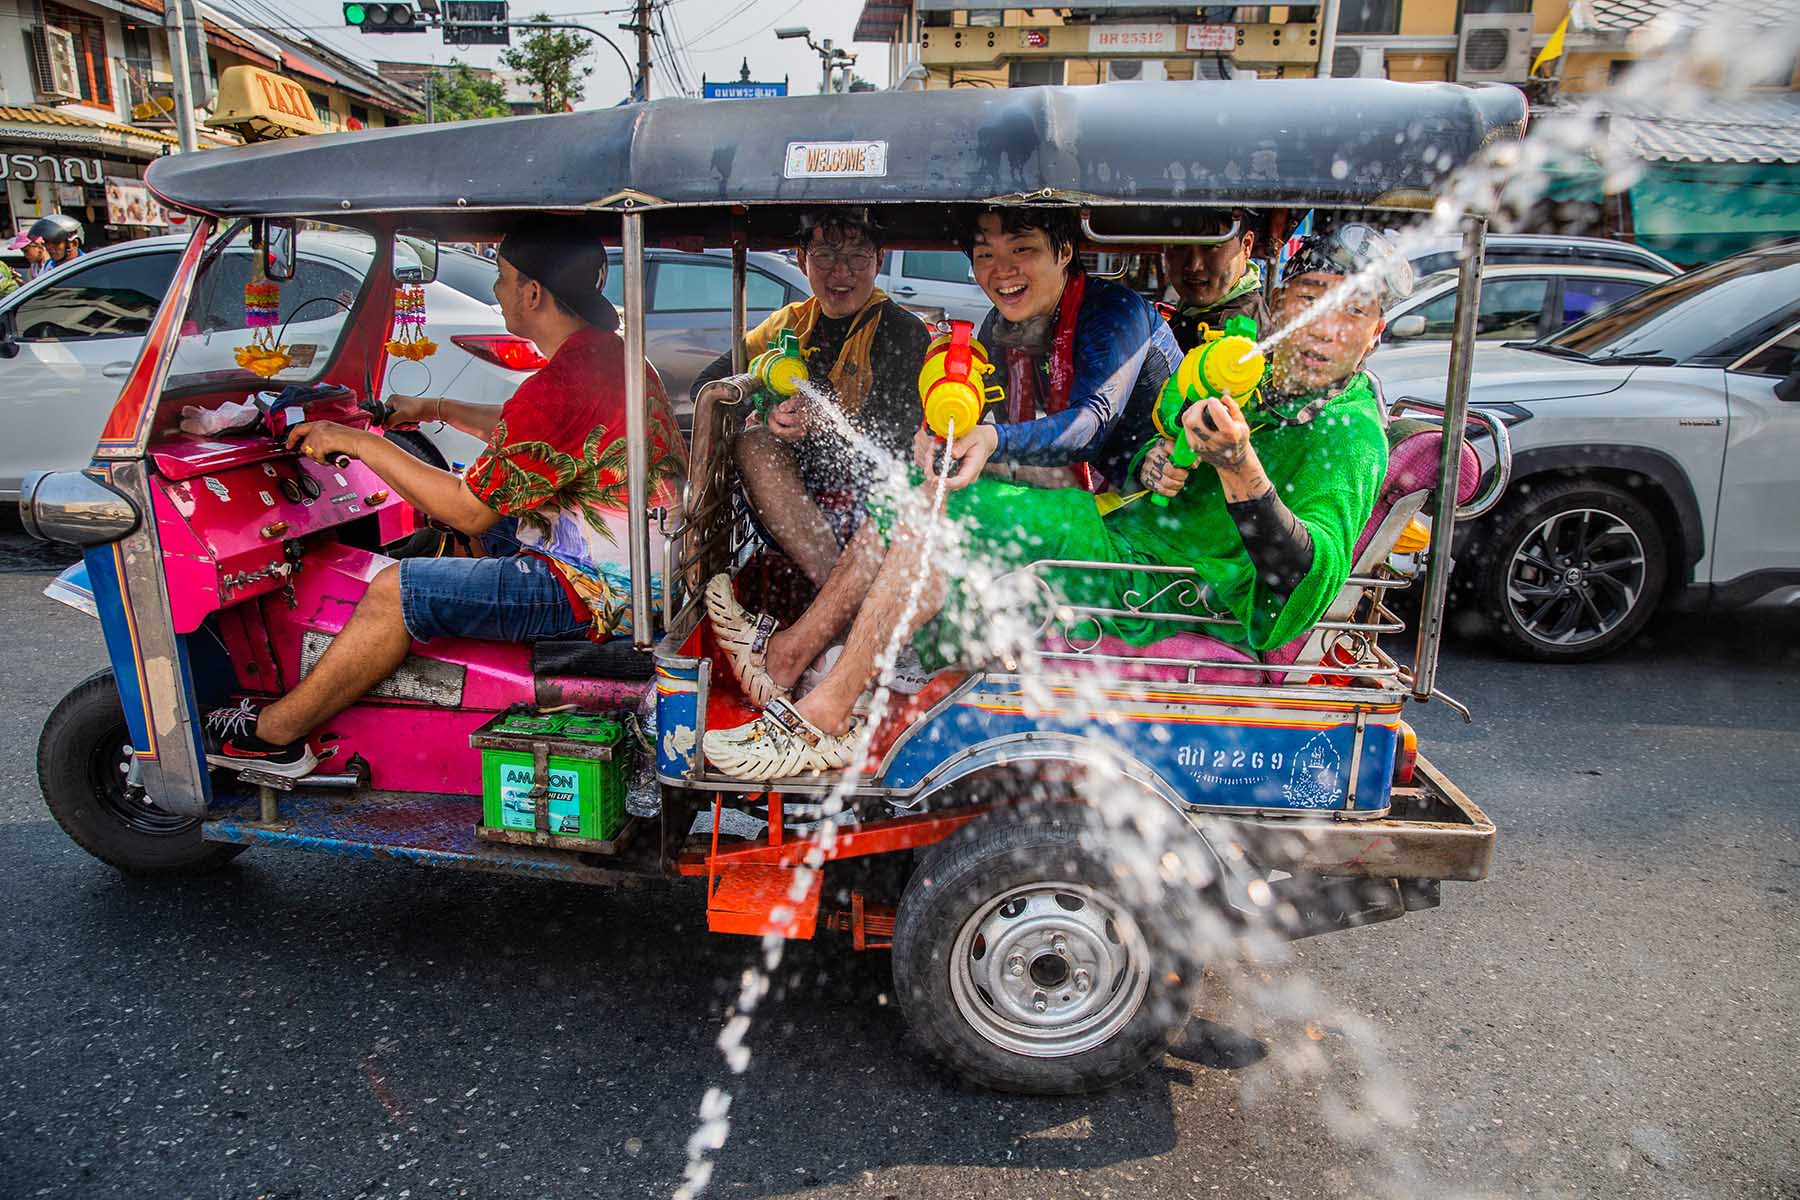 People on a tuk-tuk in Bangkok shooting others on the street with water guns during the Songkran Festival in Thailand